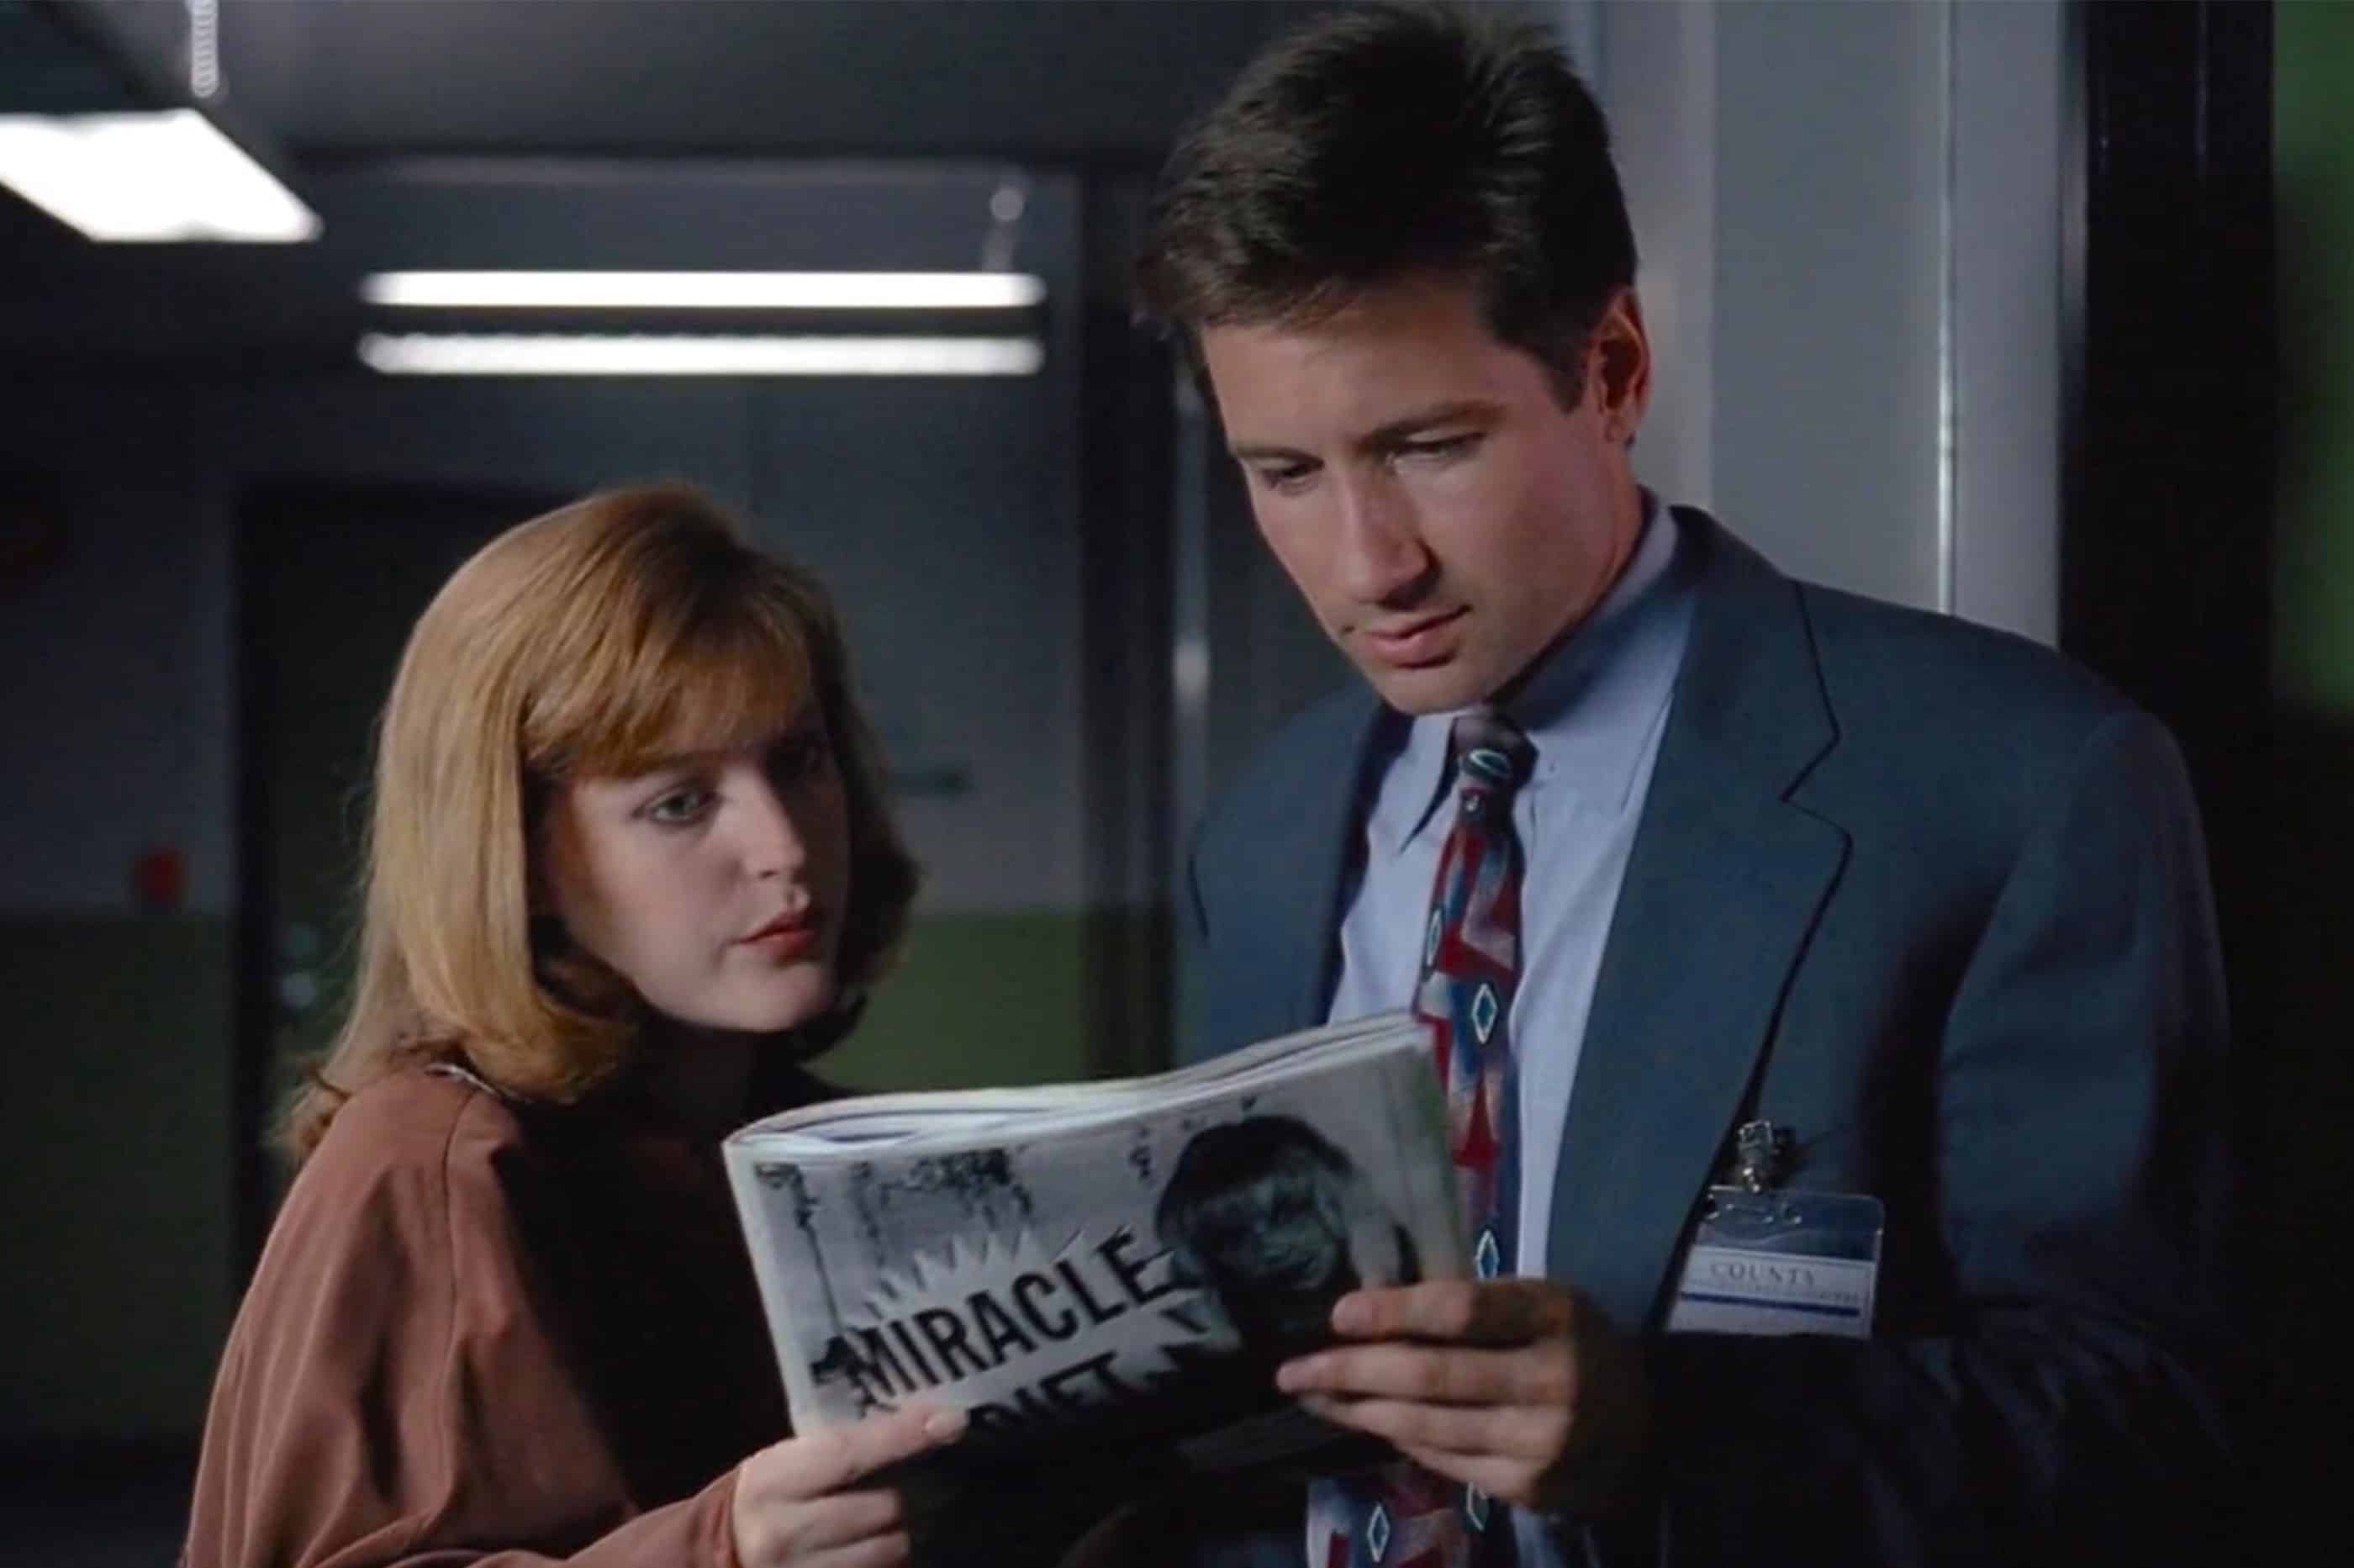 90s cult television series 'The X Files' is getting a reboot